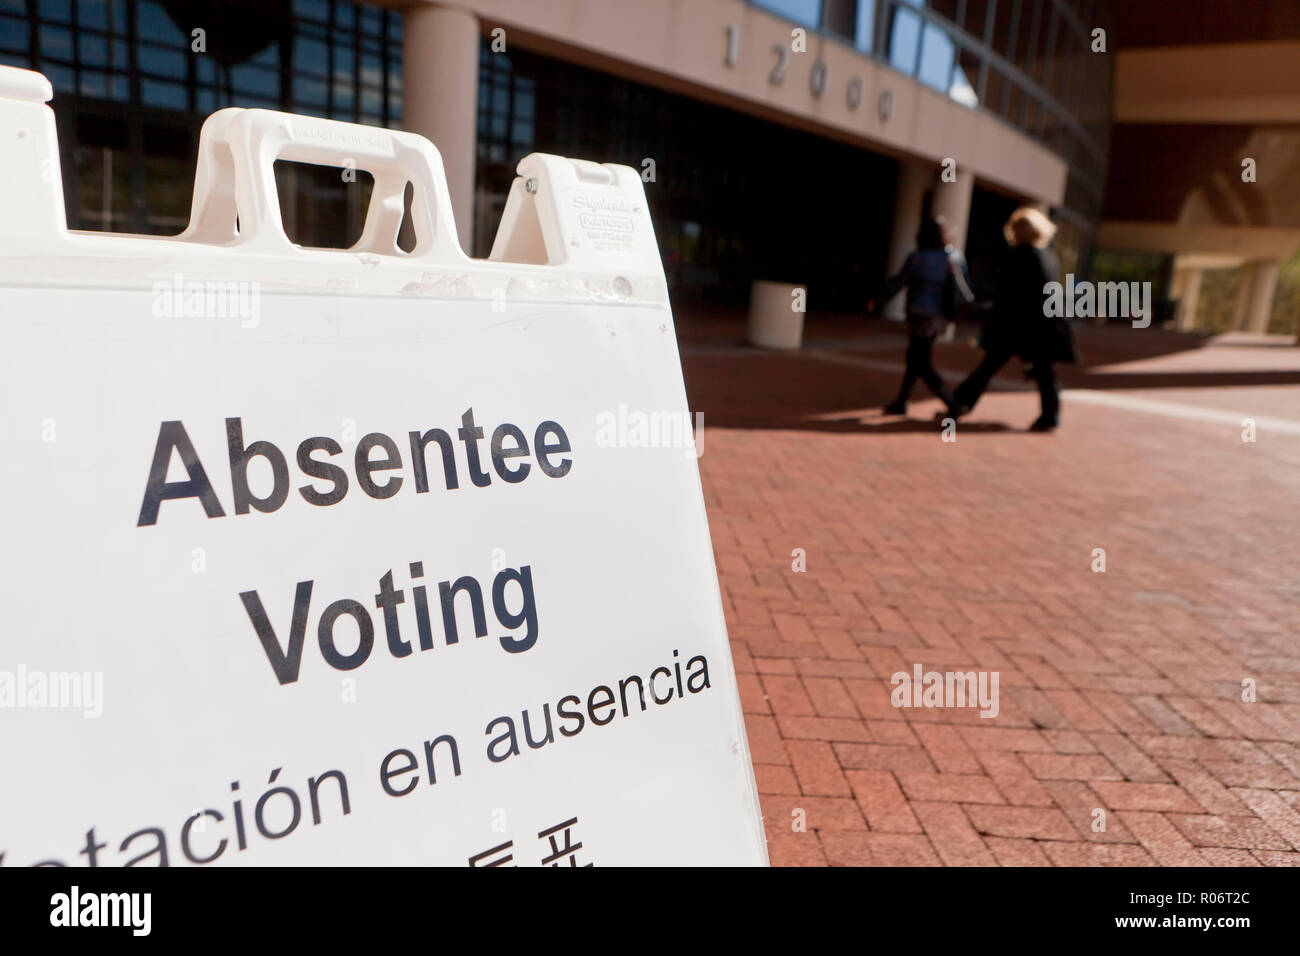 October 24th, 2018, Fairfax County, Virginia USA: Absentee voting (early voting) during midterm elections - USA Stock Photo